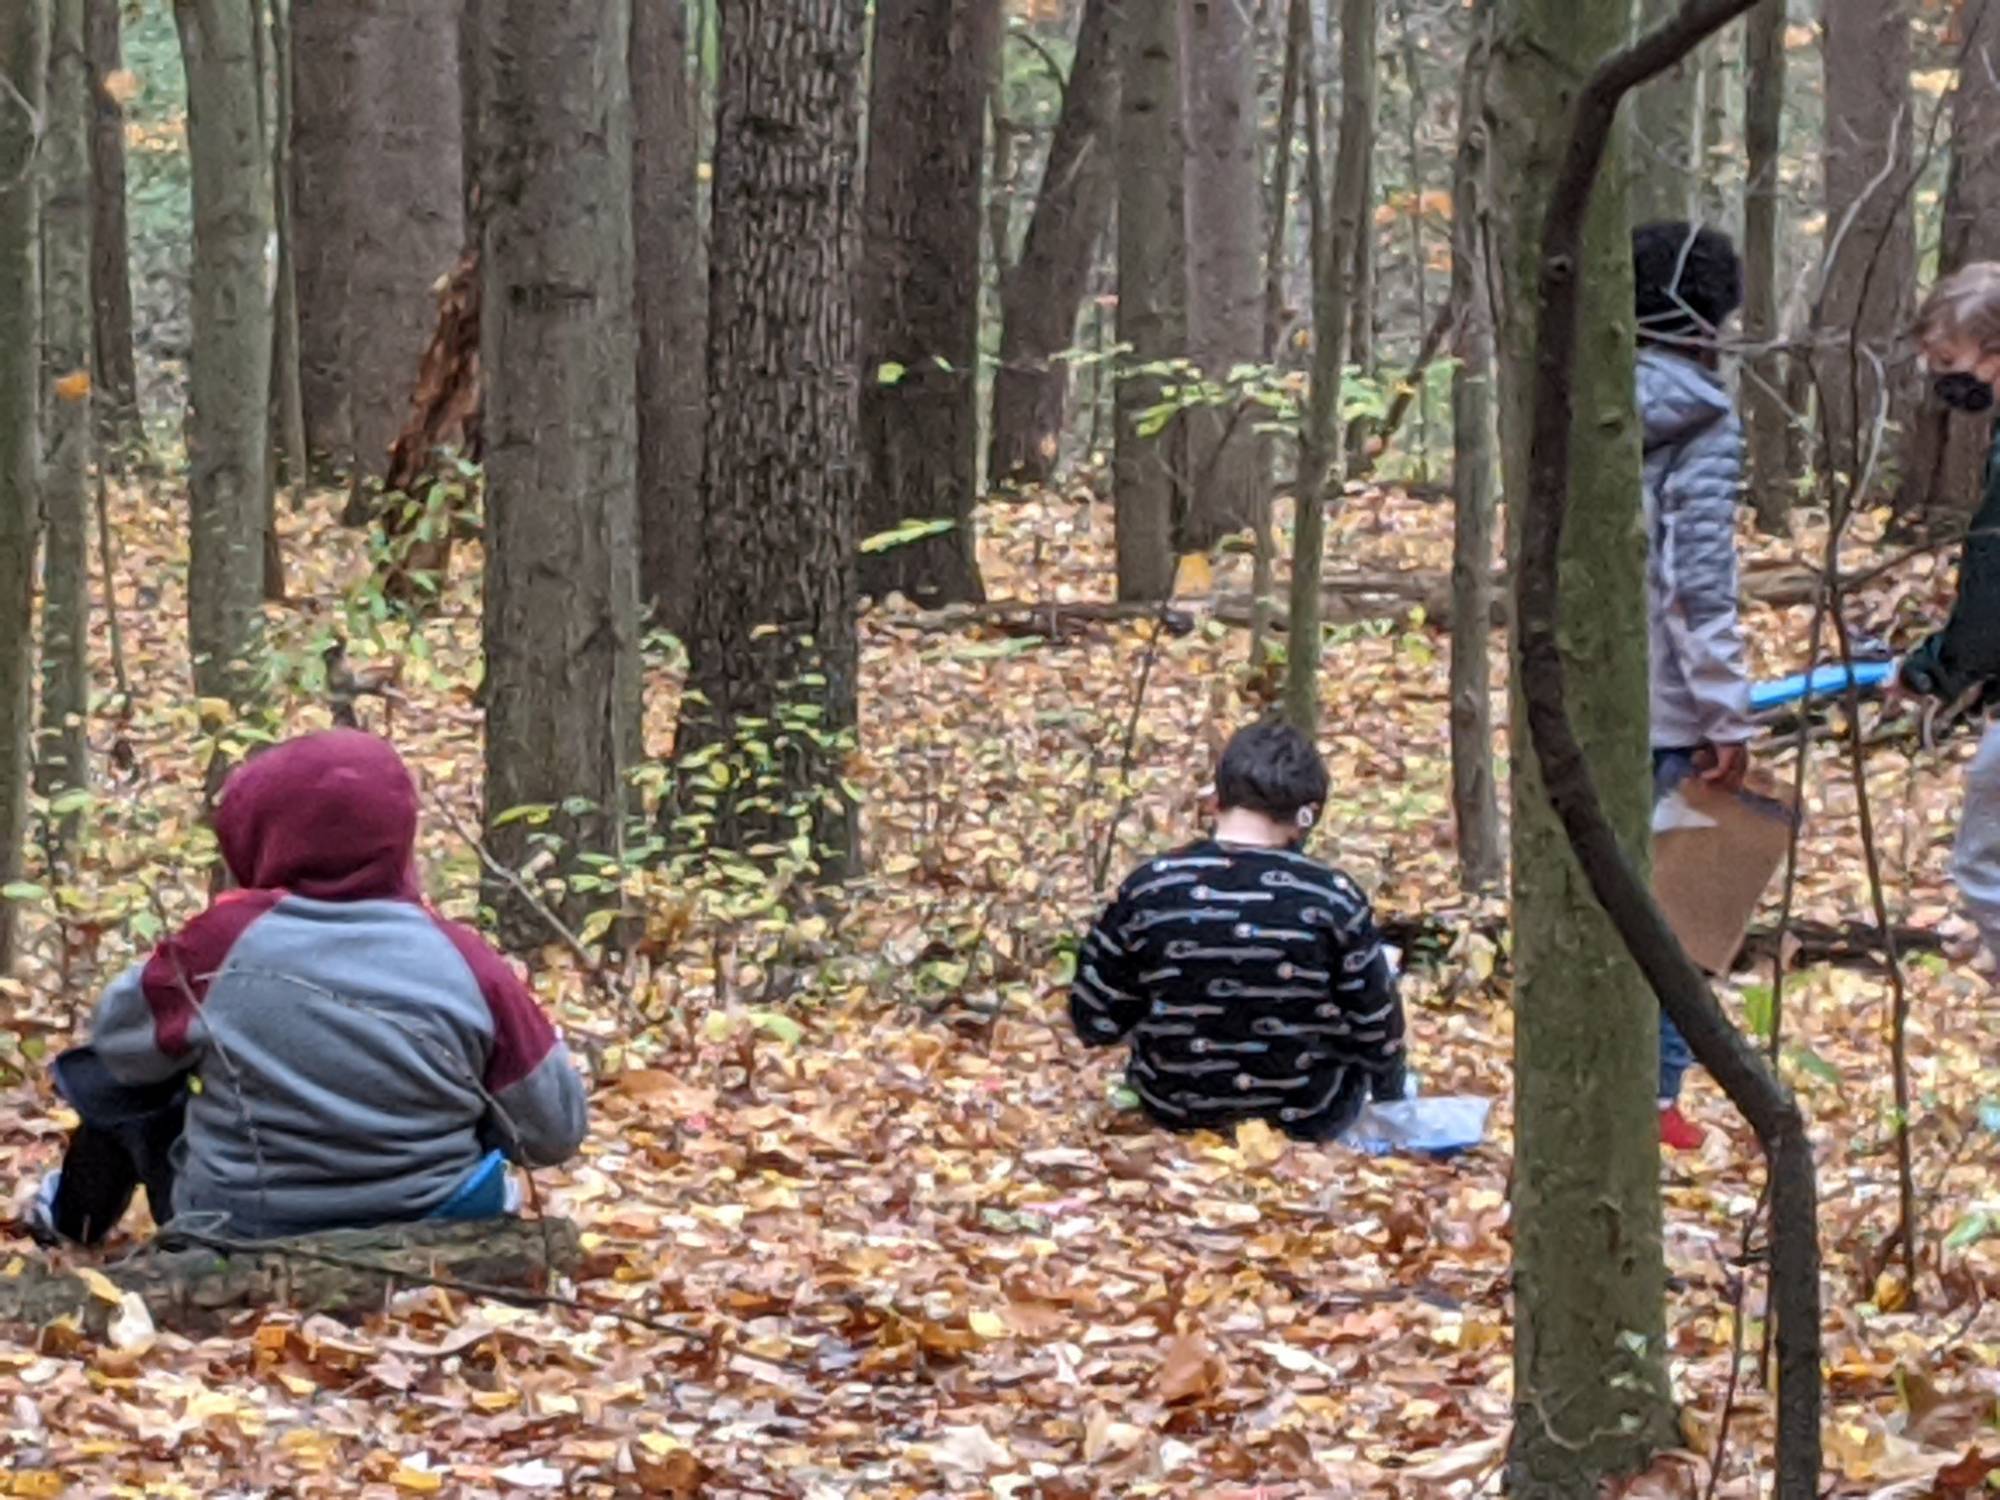 Students sitting in the leaves among the trees